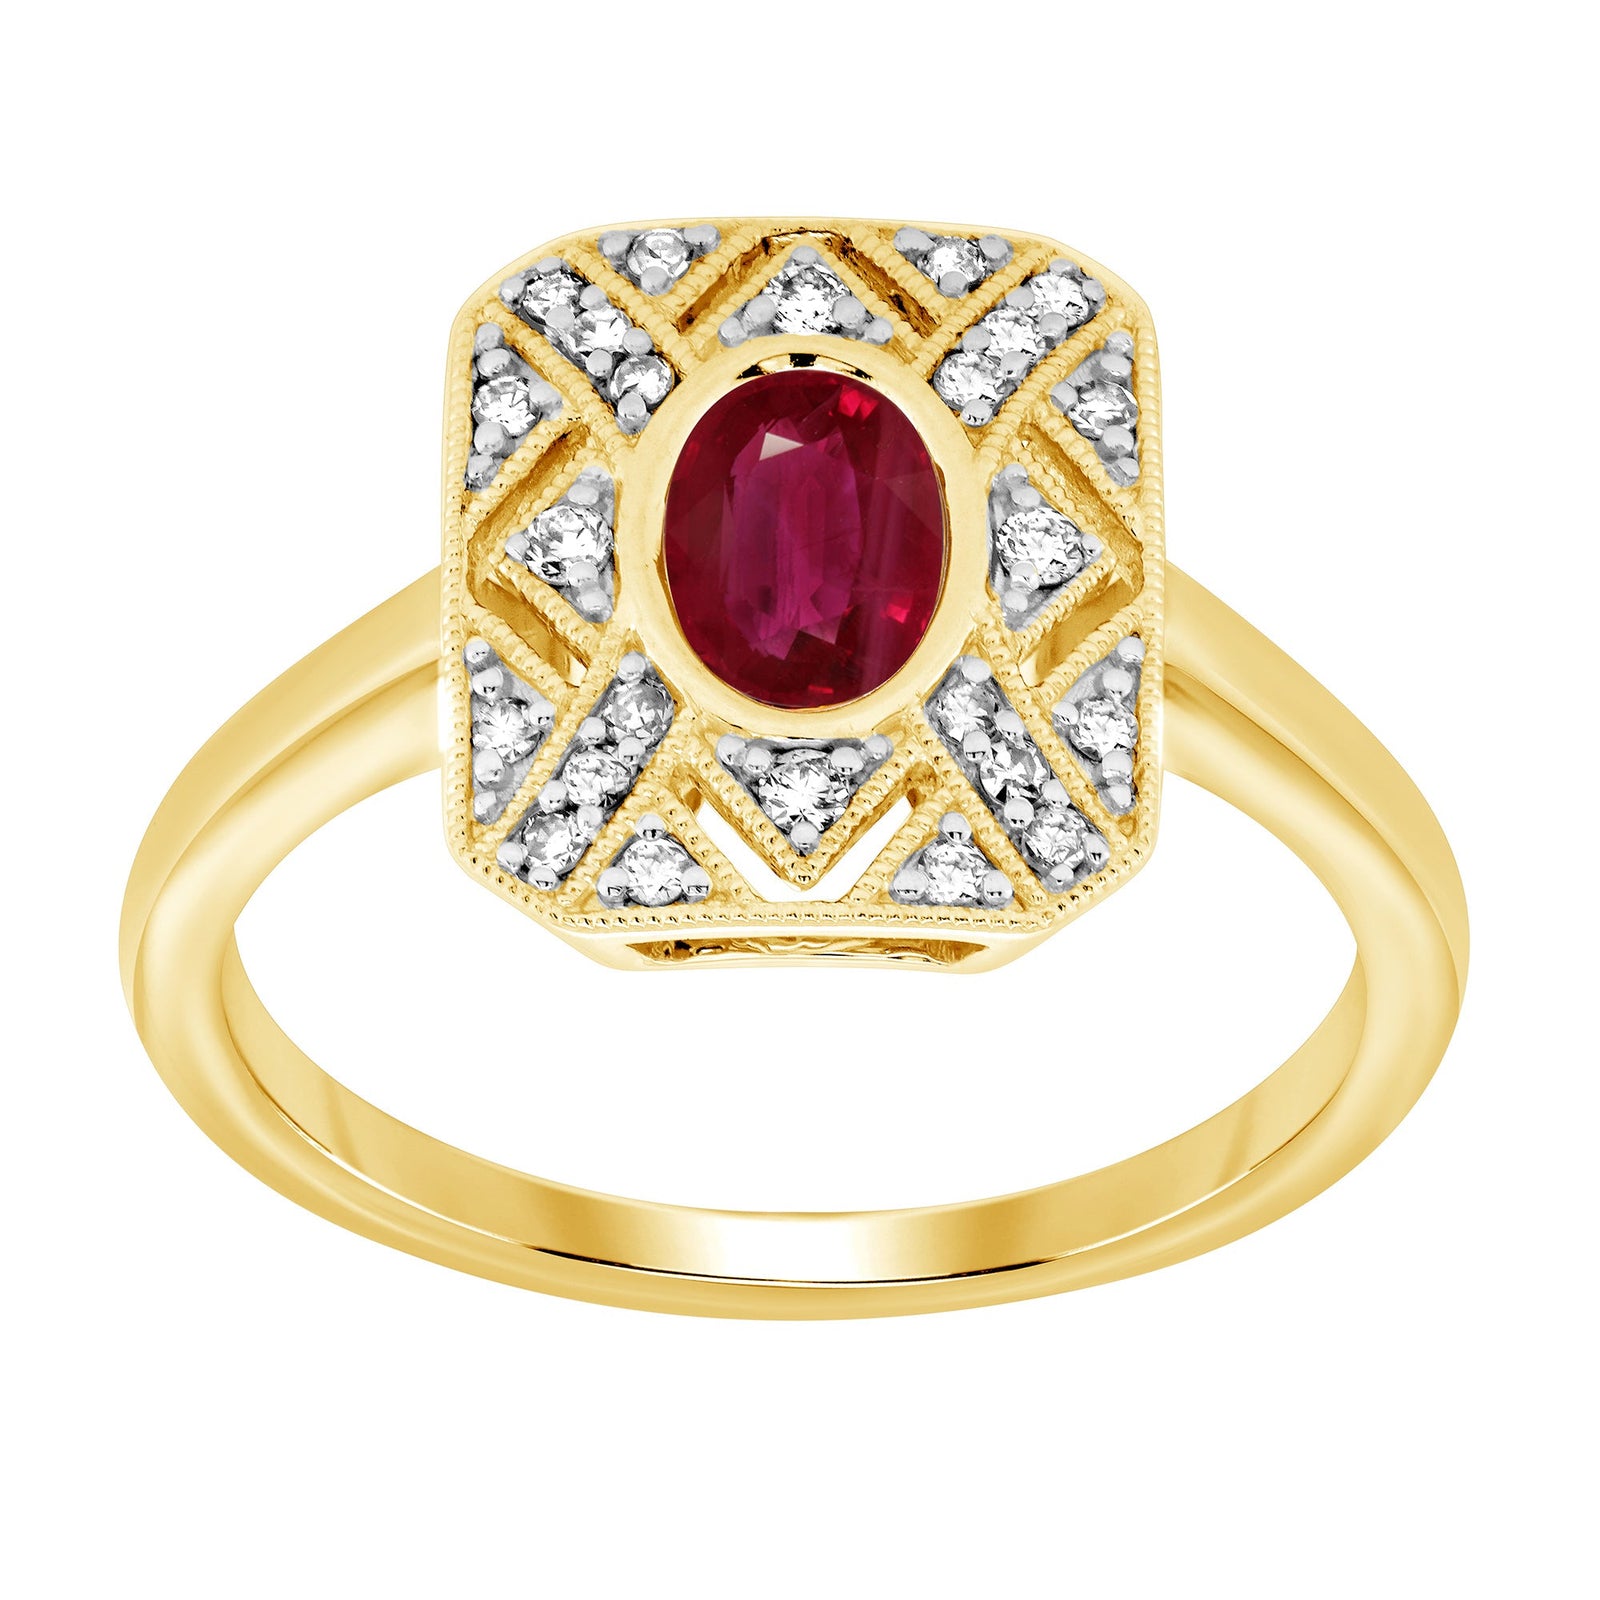 9ct gold 7x5mm oval ruby & diamond antique style ring 0.17ct